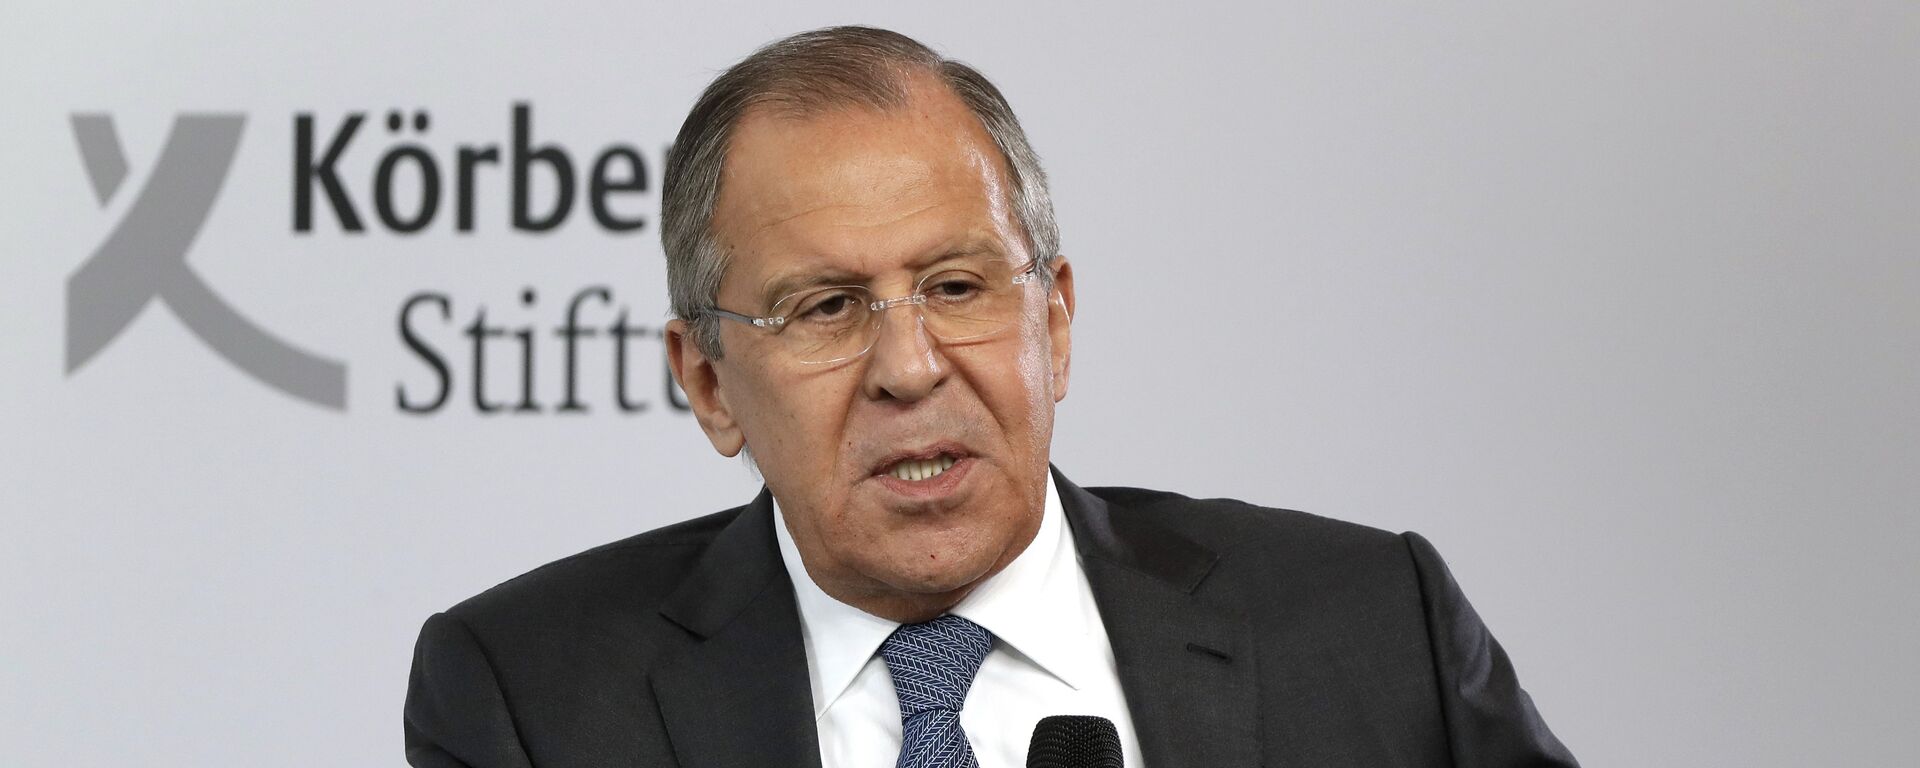 Russian Foreign Minister Sergey Lavrov speaks during an event of the Koerber Foundation in Berlin, Germany, Thursday, July 13, 2017 - Sputnik International, 1920, 17.02.2018